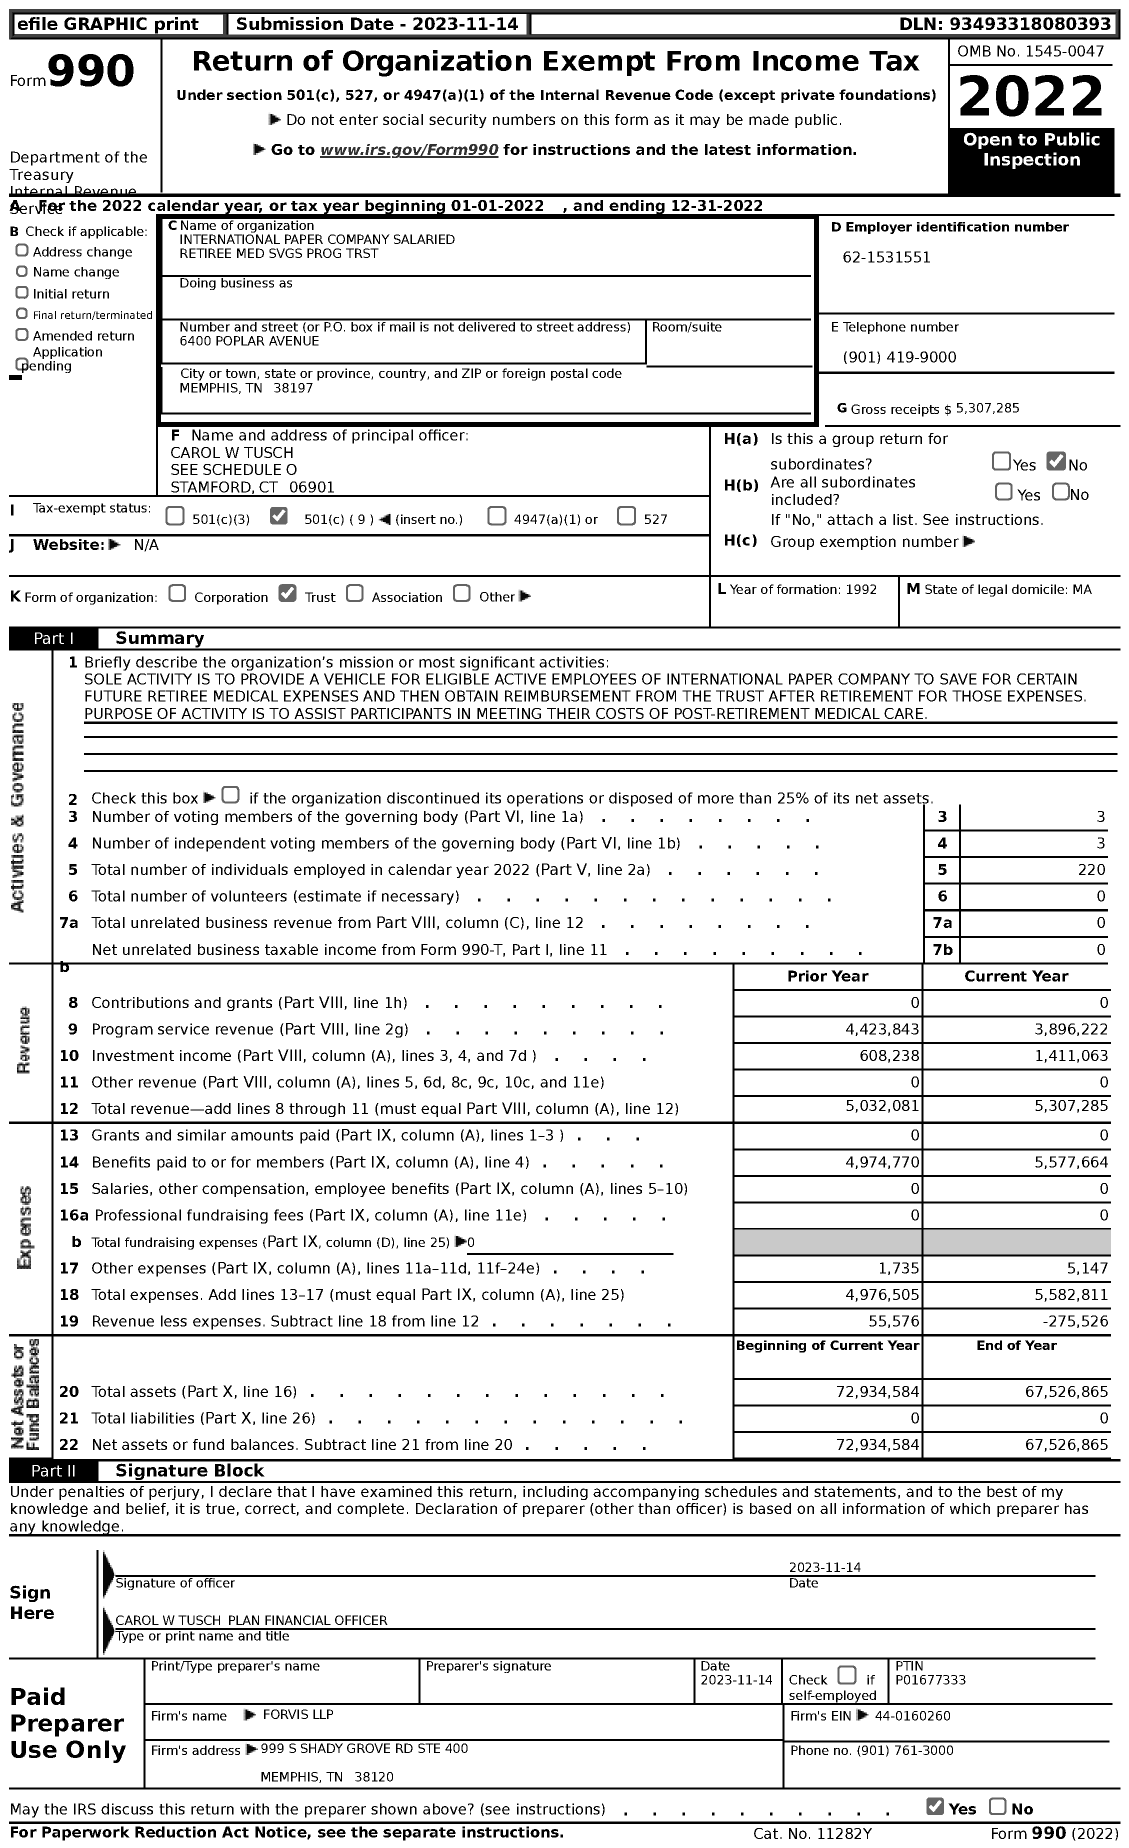 Image of first page of 2022 Form 990 for International Paper Company Salaried Retiree Med SVGS Prog TRST